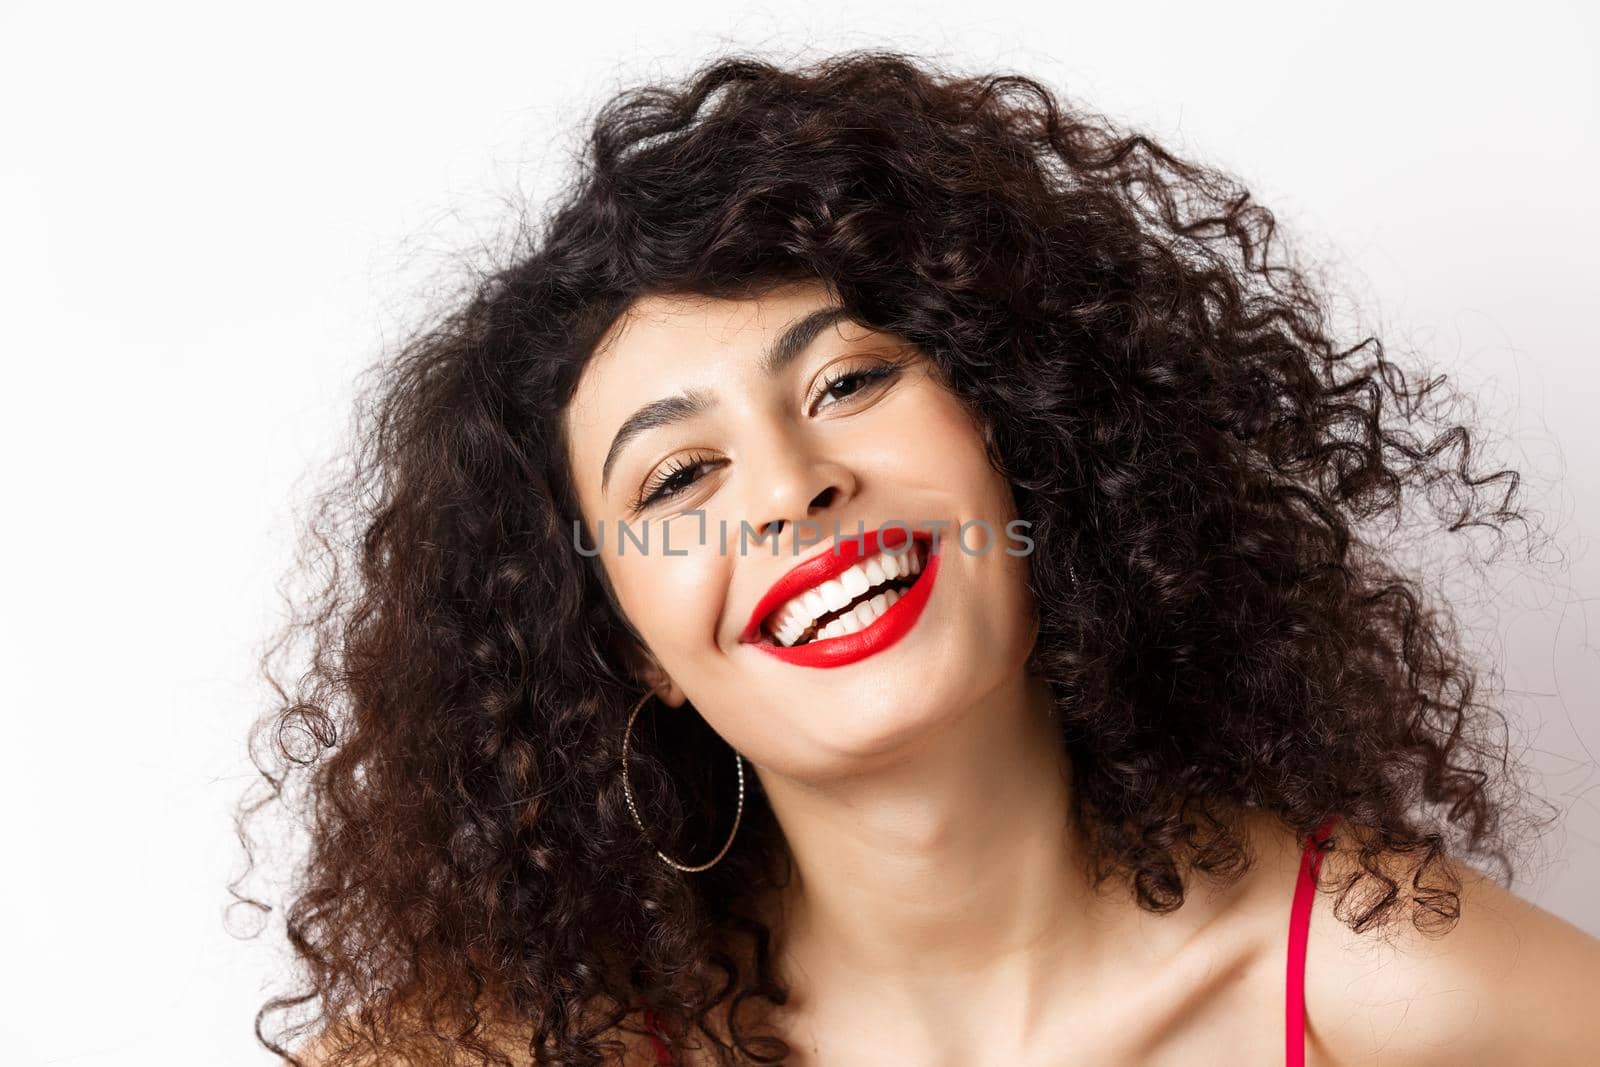 Close-up portrait of happy beautiful woman with curly hair and red lip, smiling white teeth, express happiness and joy.